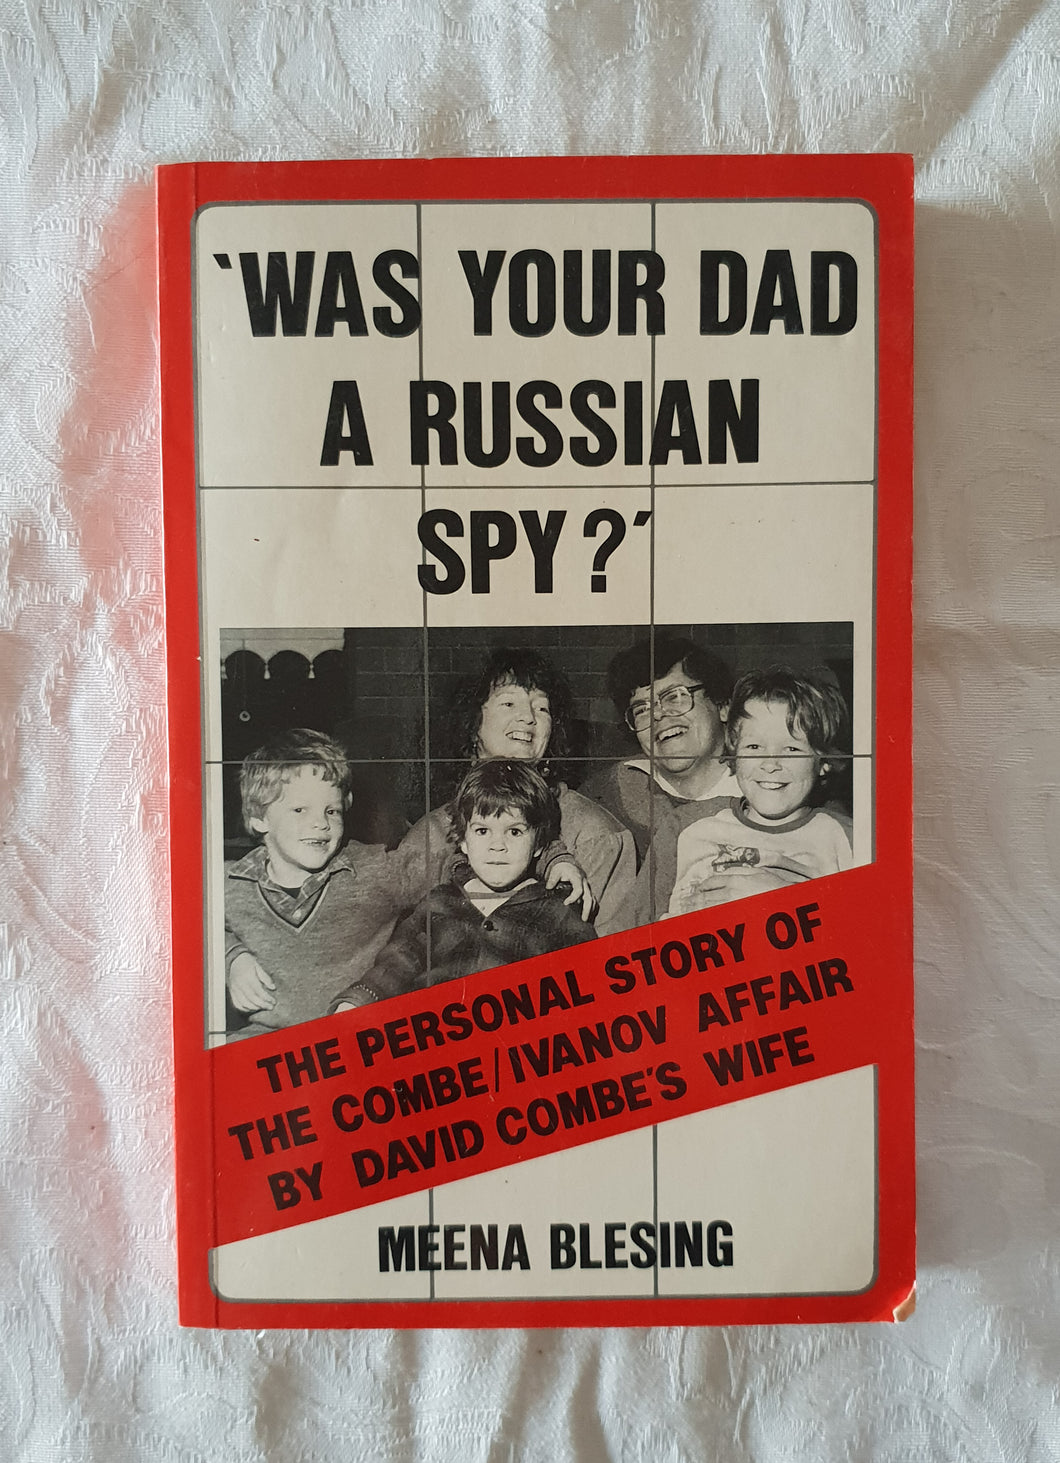 Was Your Dad A Russian Spy?  The personal story of the Combe/Ivanov Affair by David Combe's Wife  by Meena Blesing